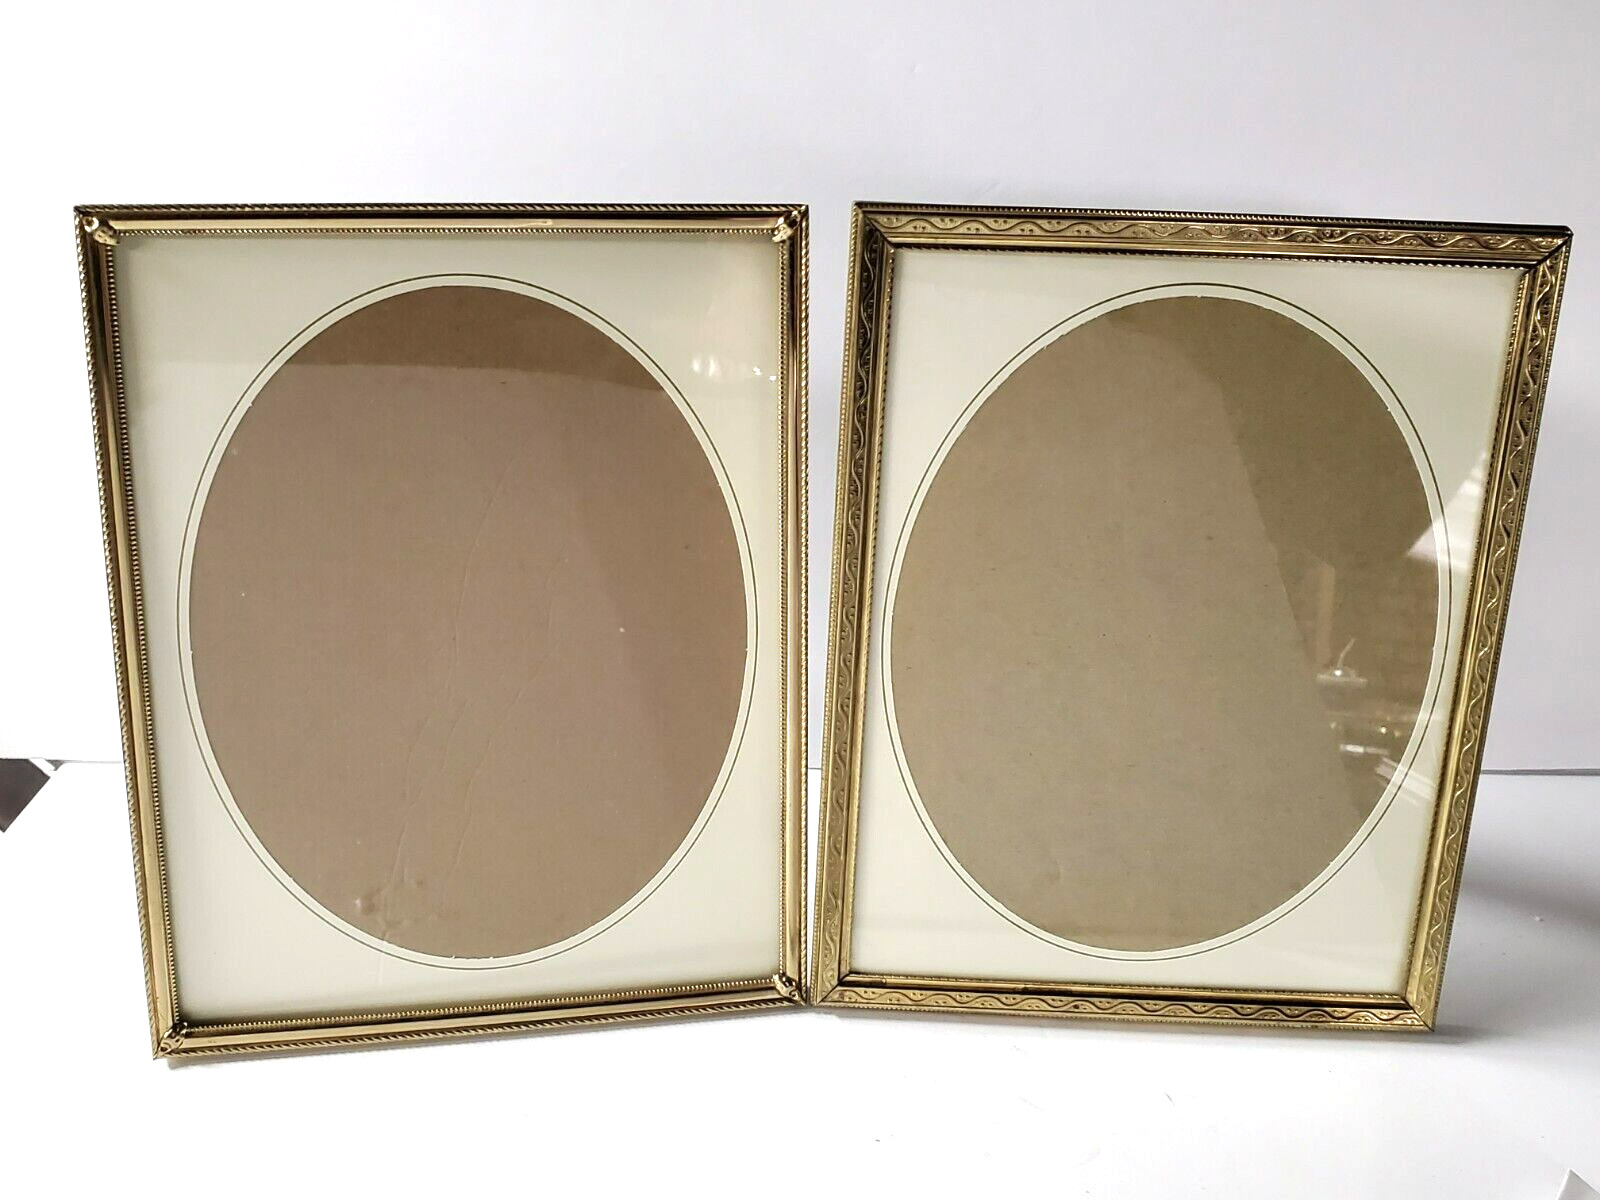 Two Metal Picture Frames 8x10 Matted Gold Tone Metal Vintage Free Standing